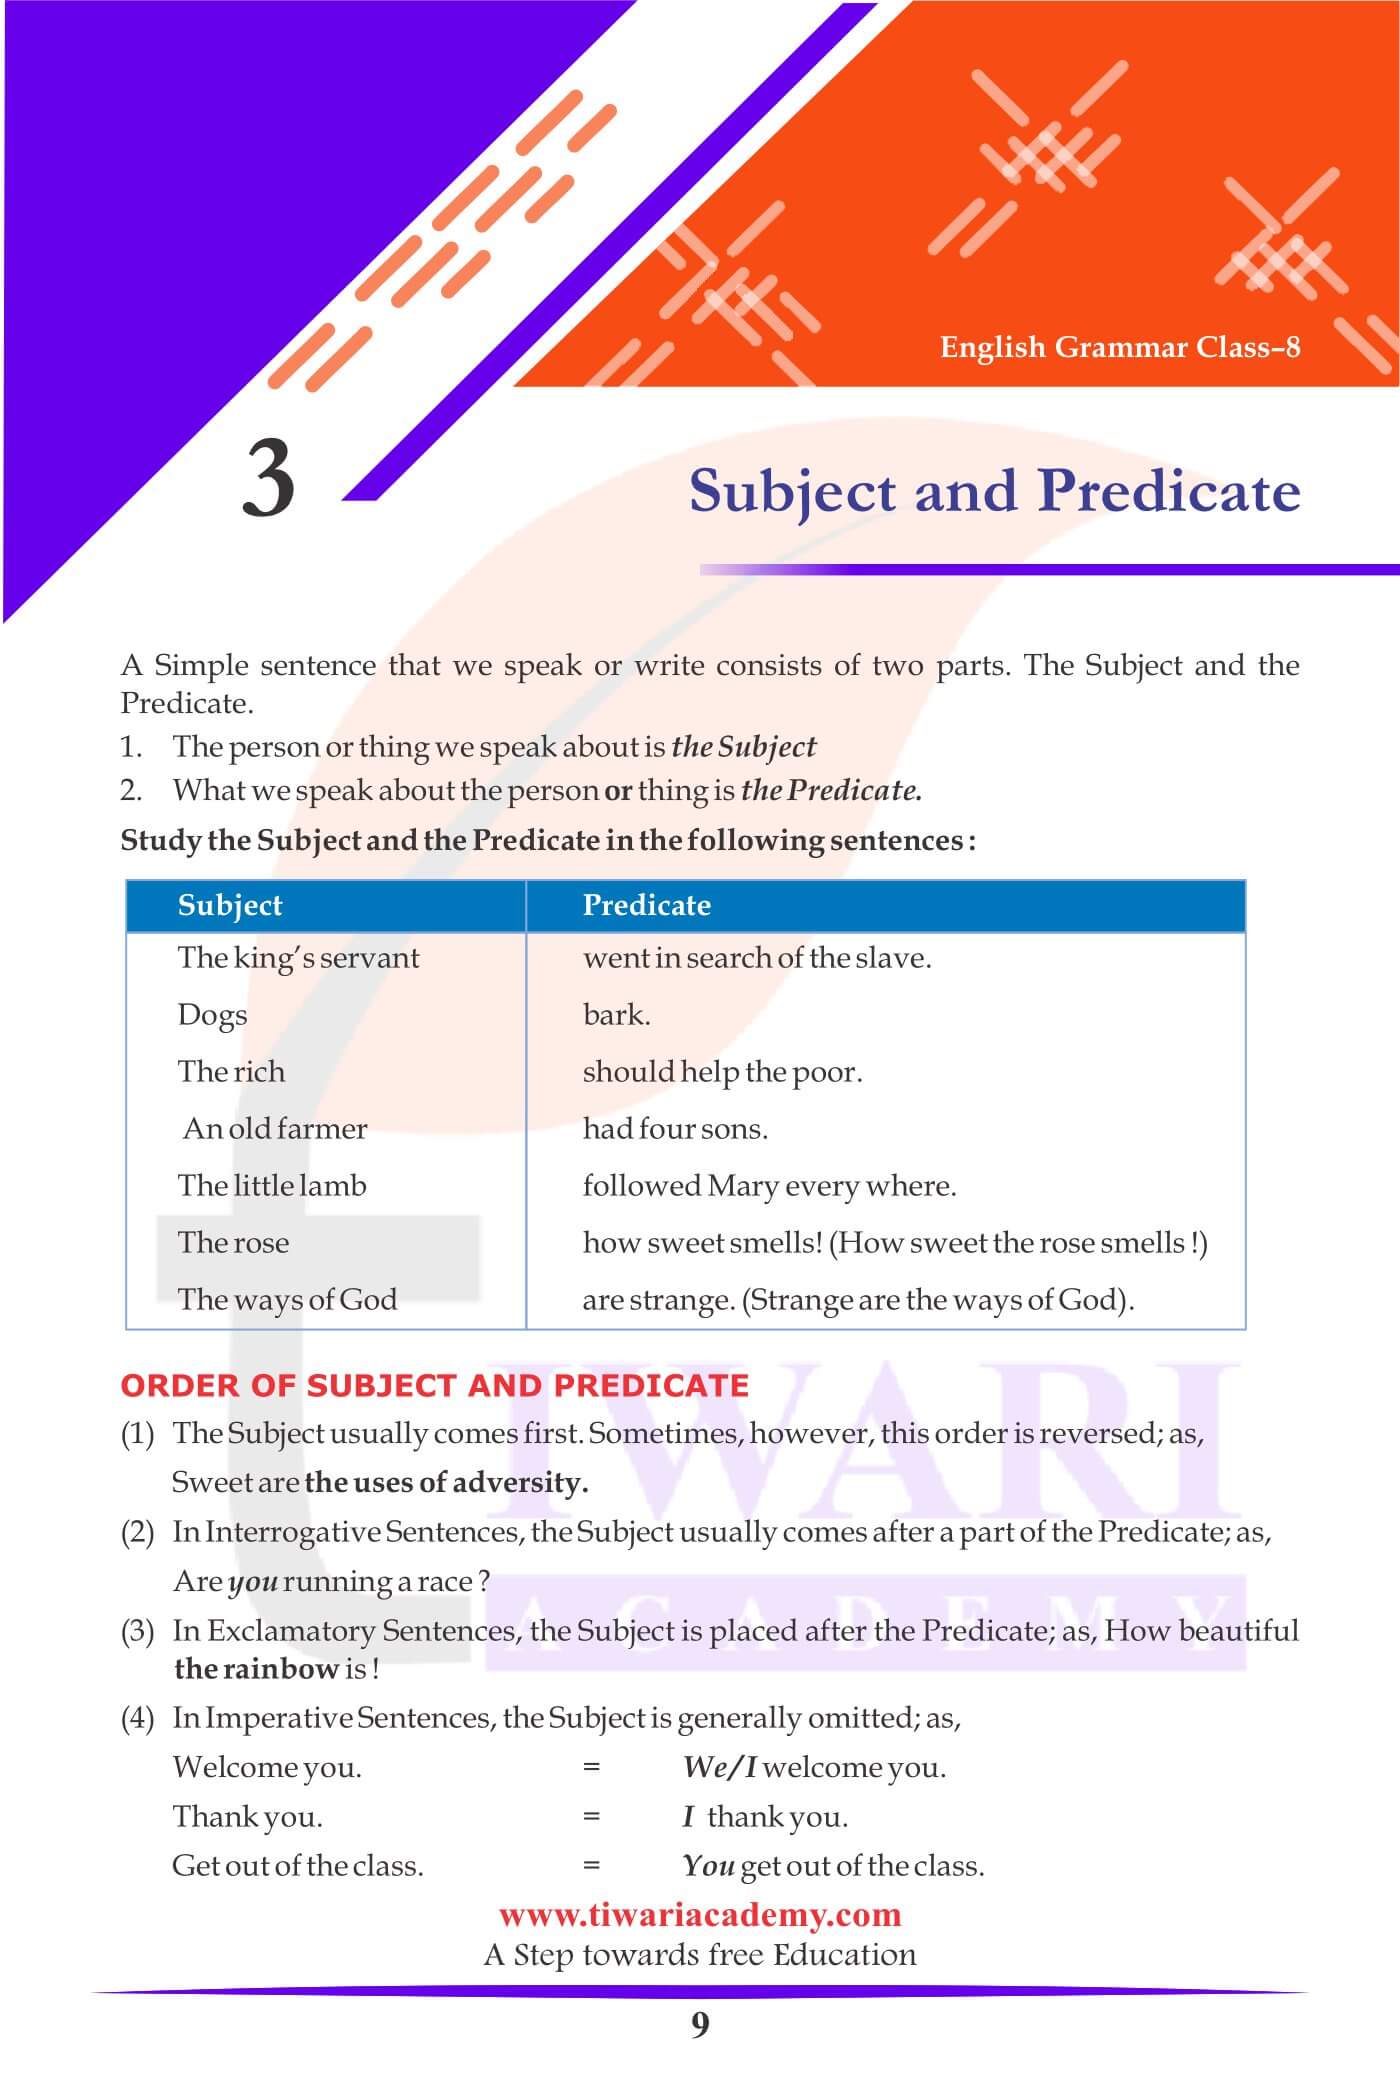 Class 8 English Grammar Chapter 3 Subject and Predicate